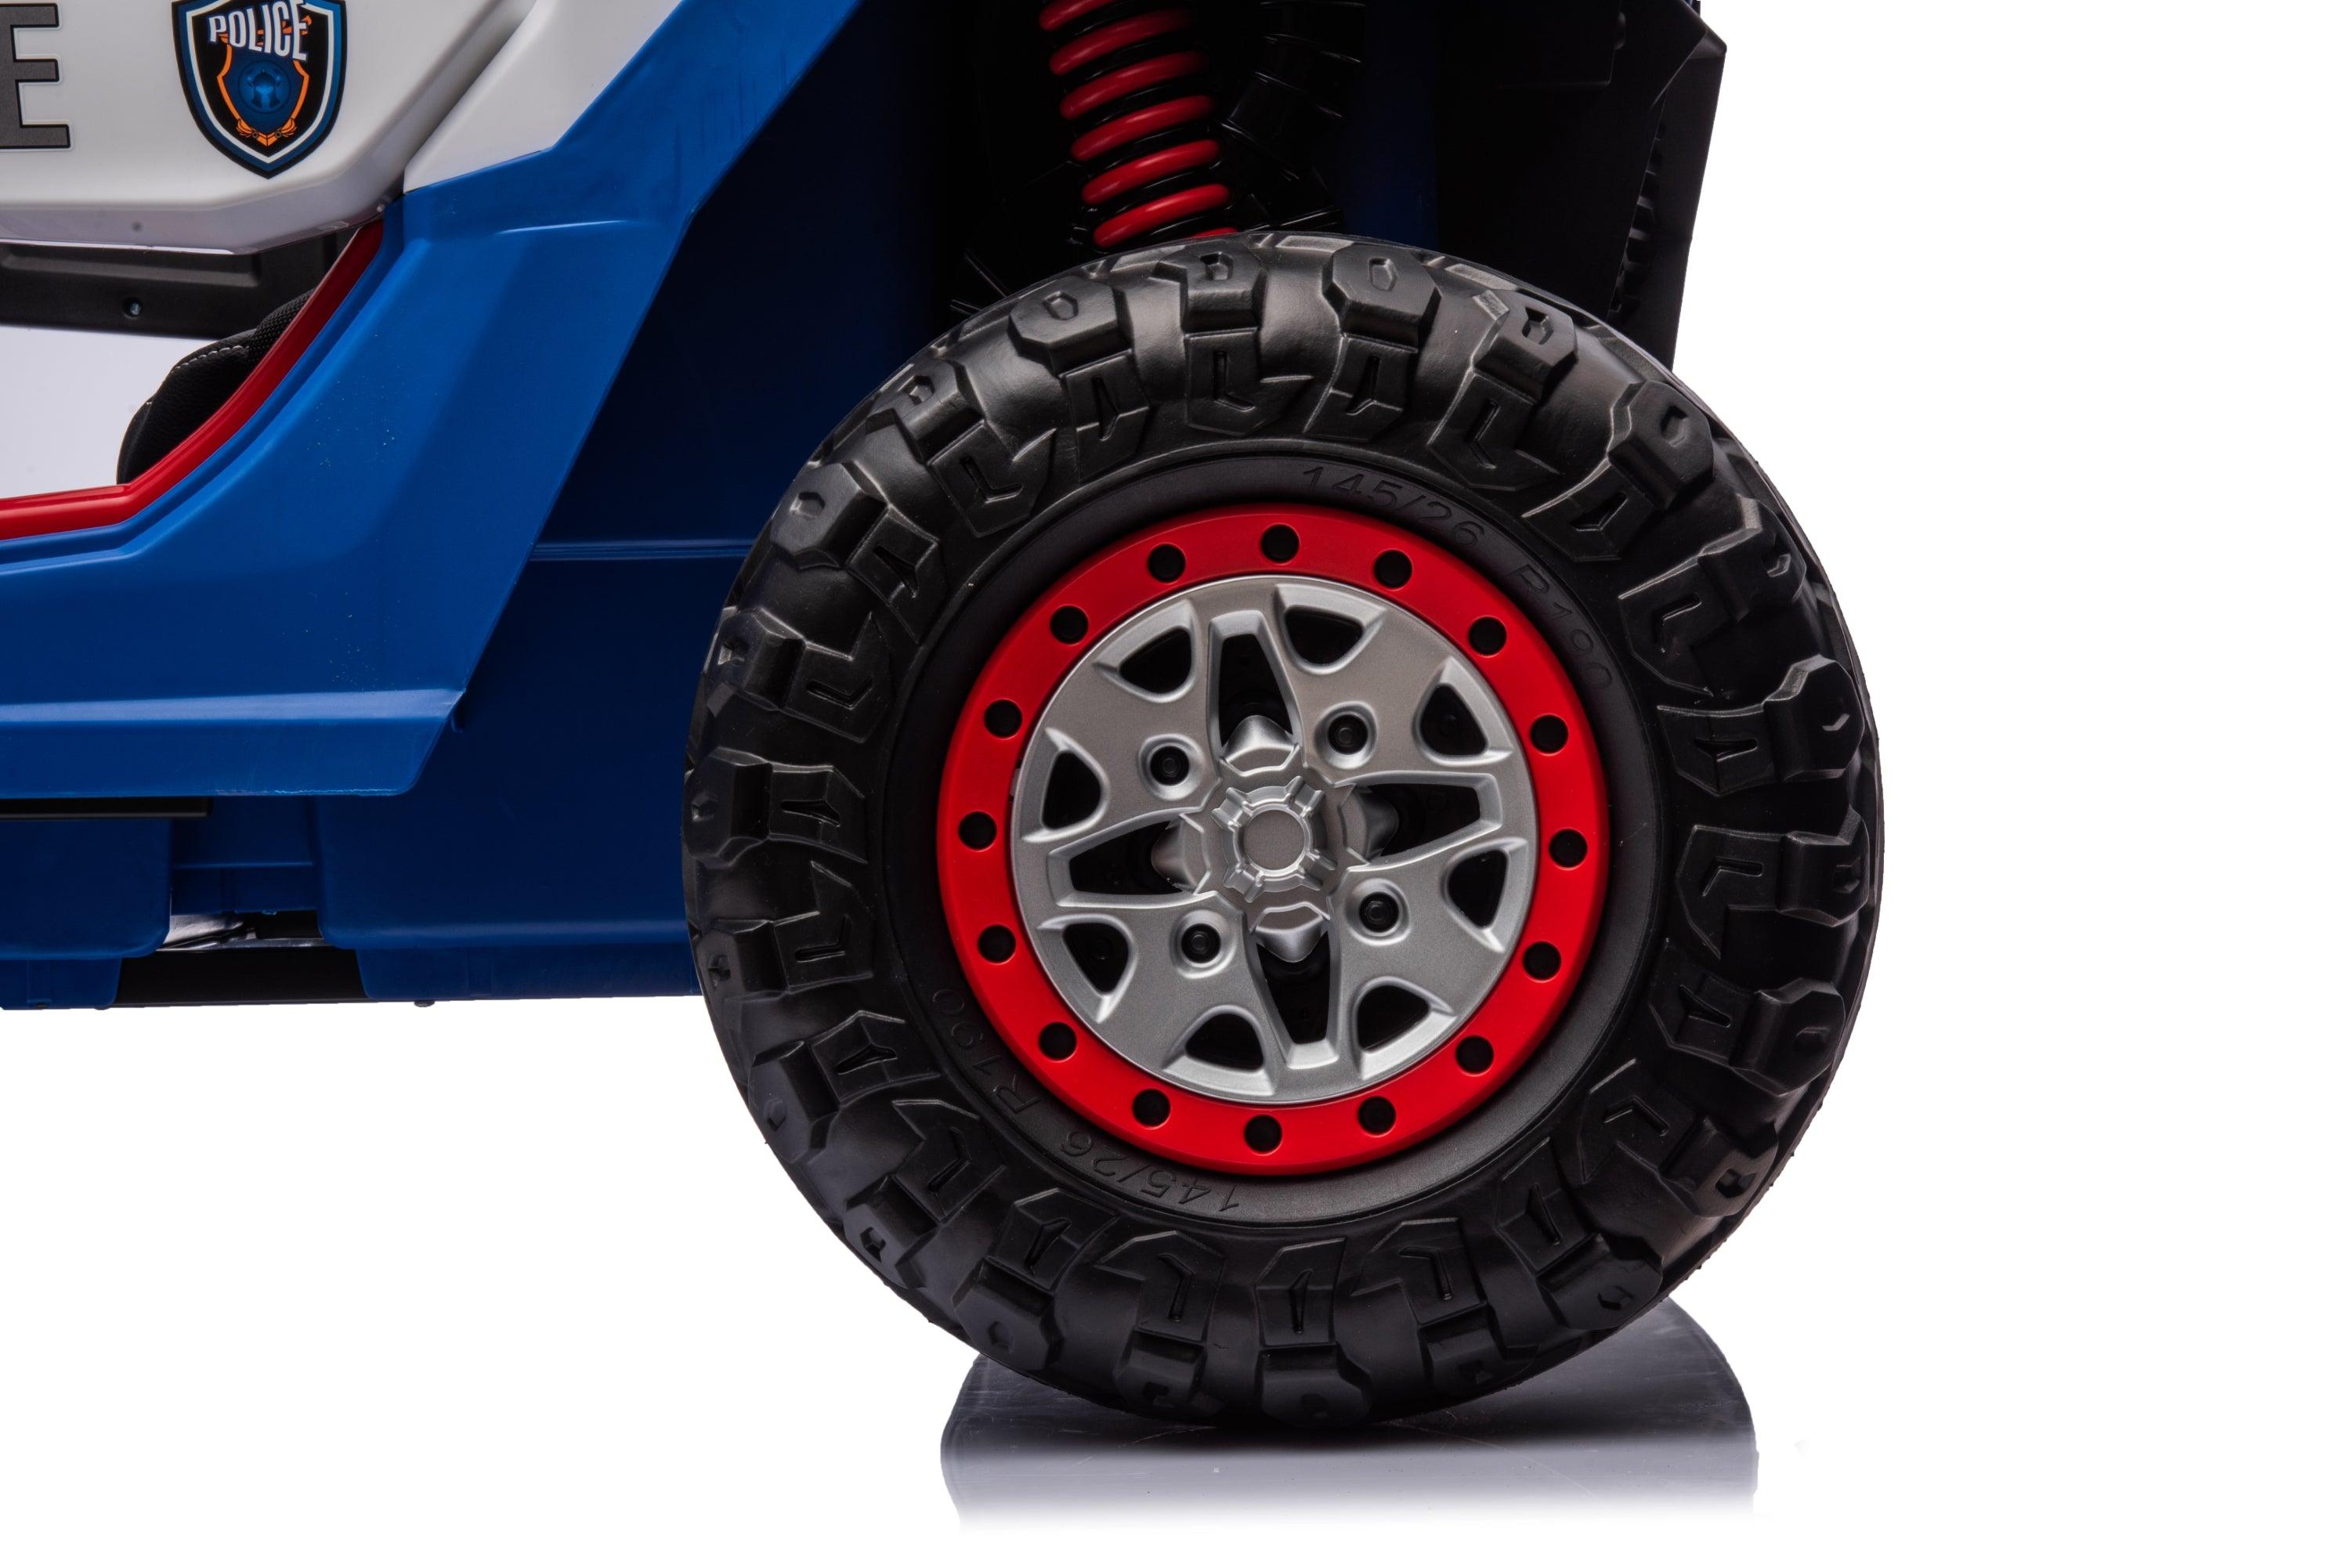 24V Freddo Storm Police UTV 2-Seater for Kids with Lights & Sirens for Action-Packed Adventures - DTI Direct USA